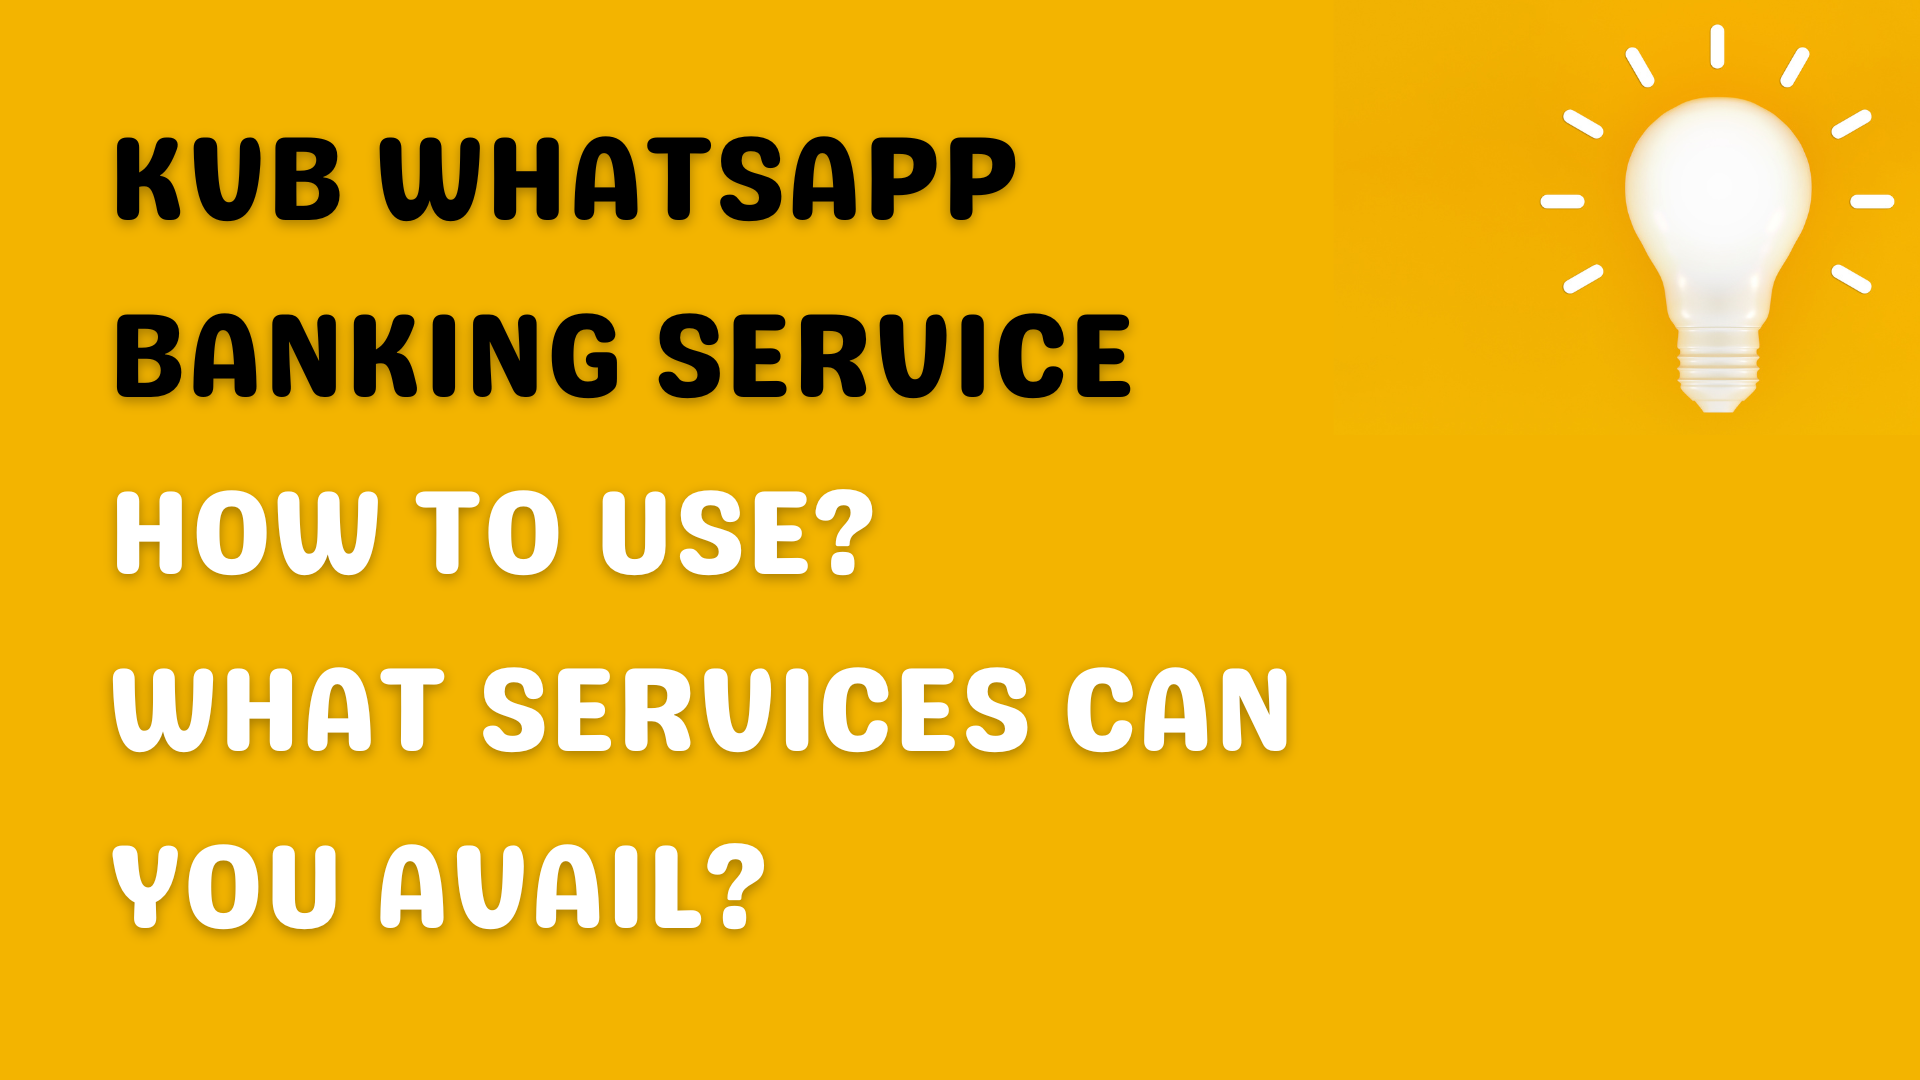 KVB WhatsApp Banking Number | How To Use? What Services Can You Avail?